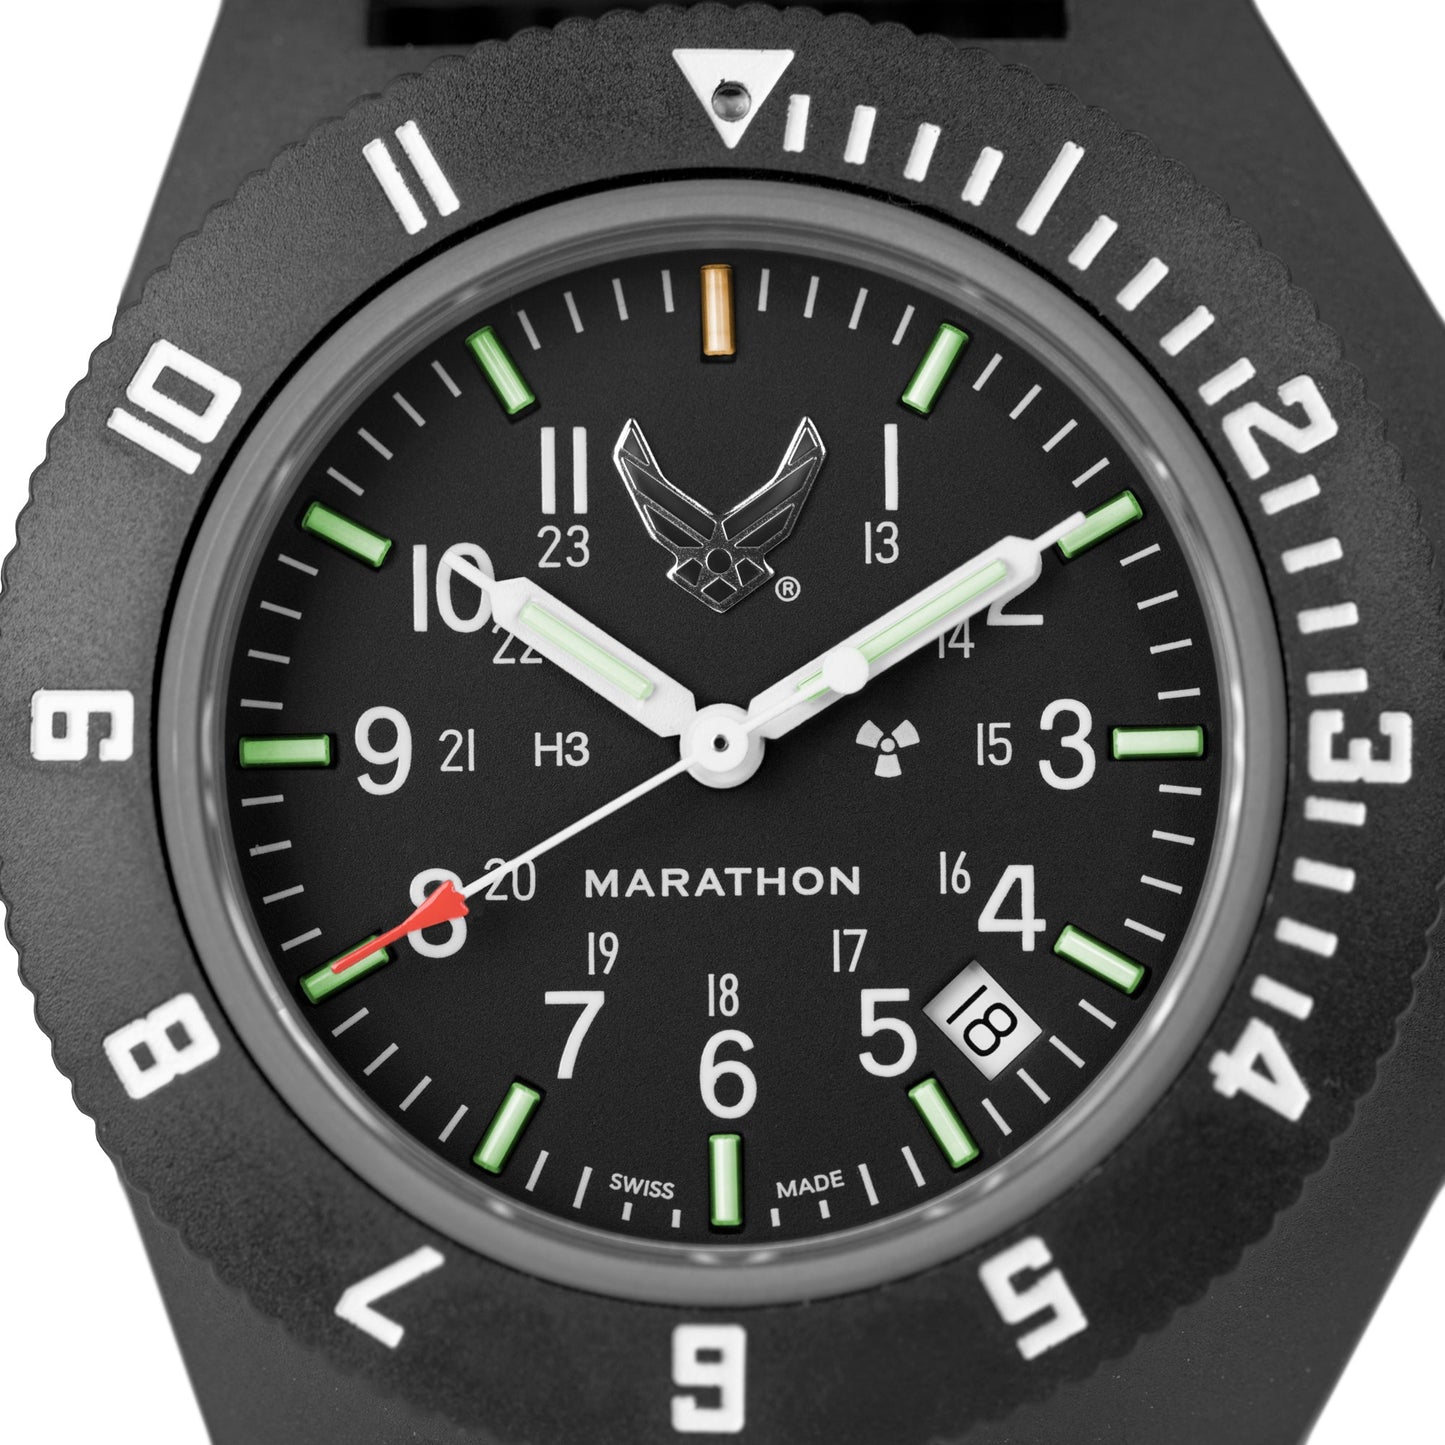 OFFICIAL USAF™ PILOT'S NAVIGATOR WITH DATE - 41MM